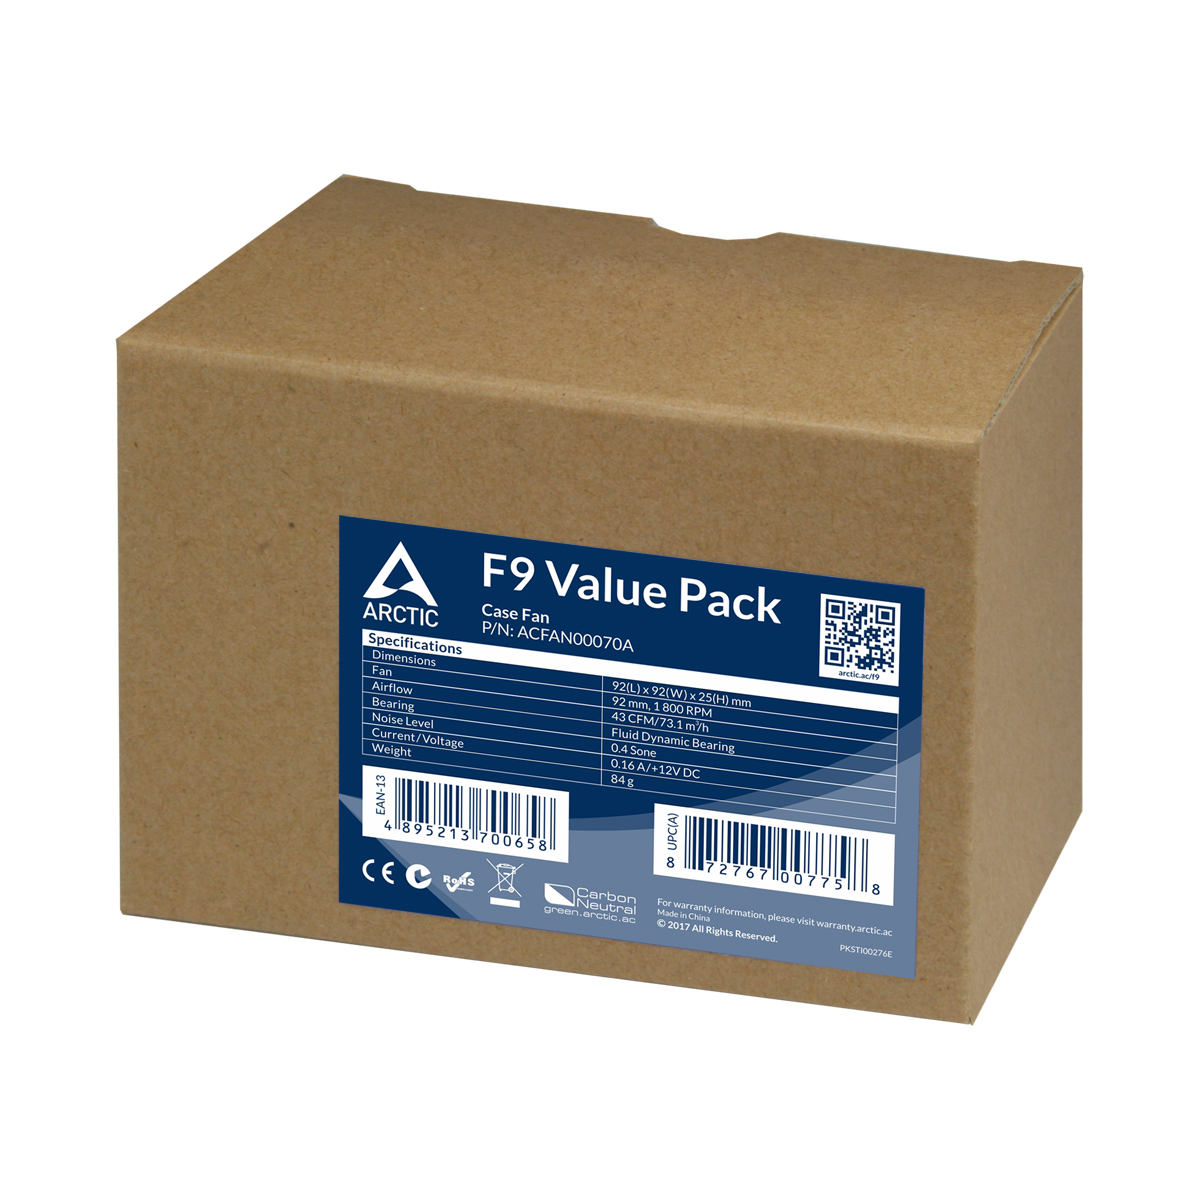 F9_Value_Pack_G02